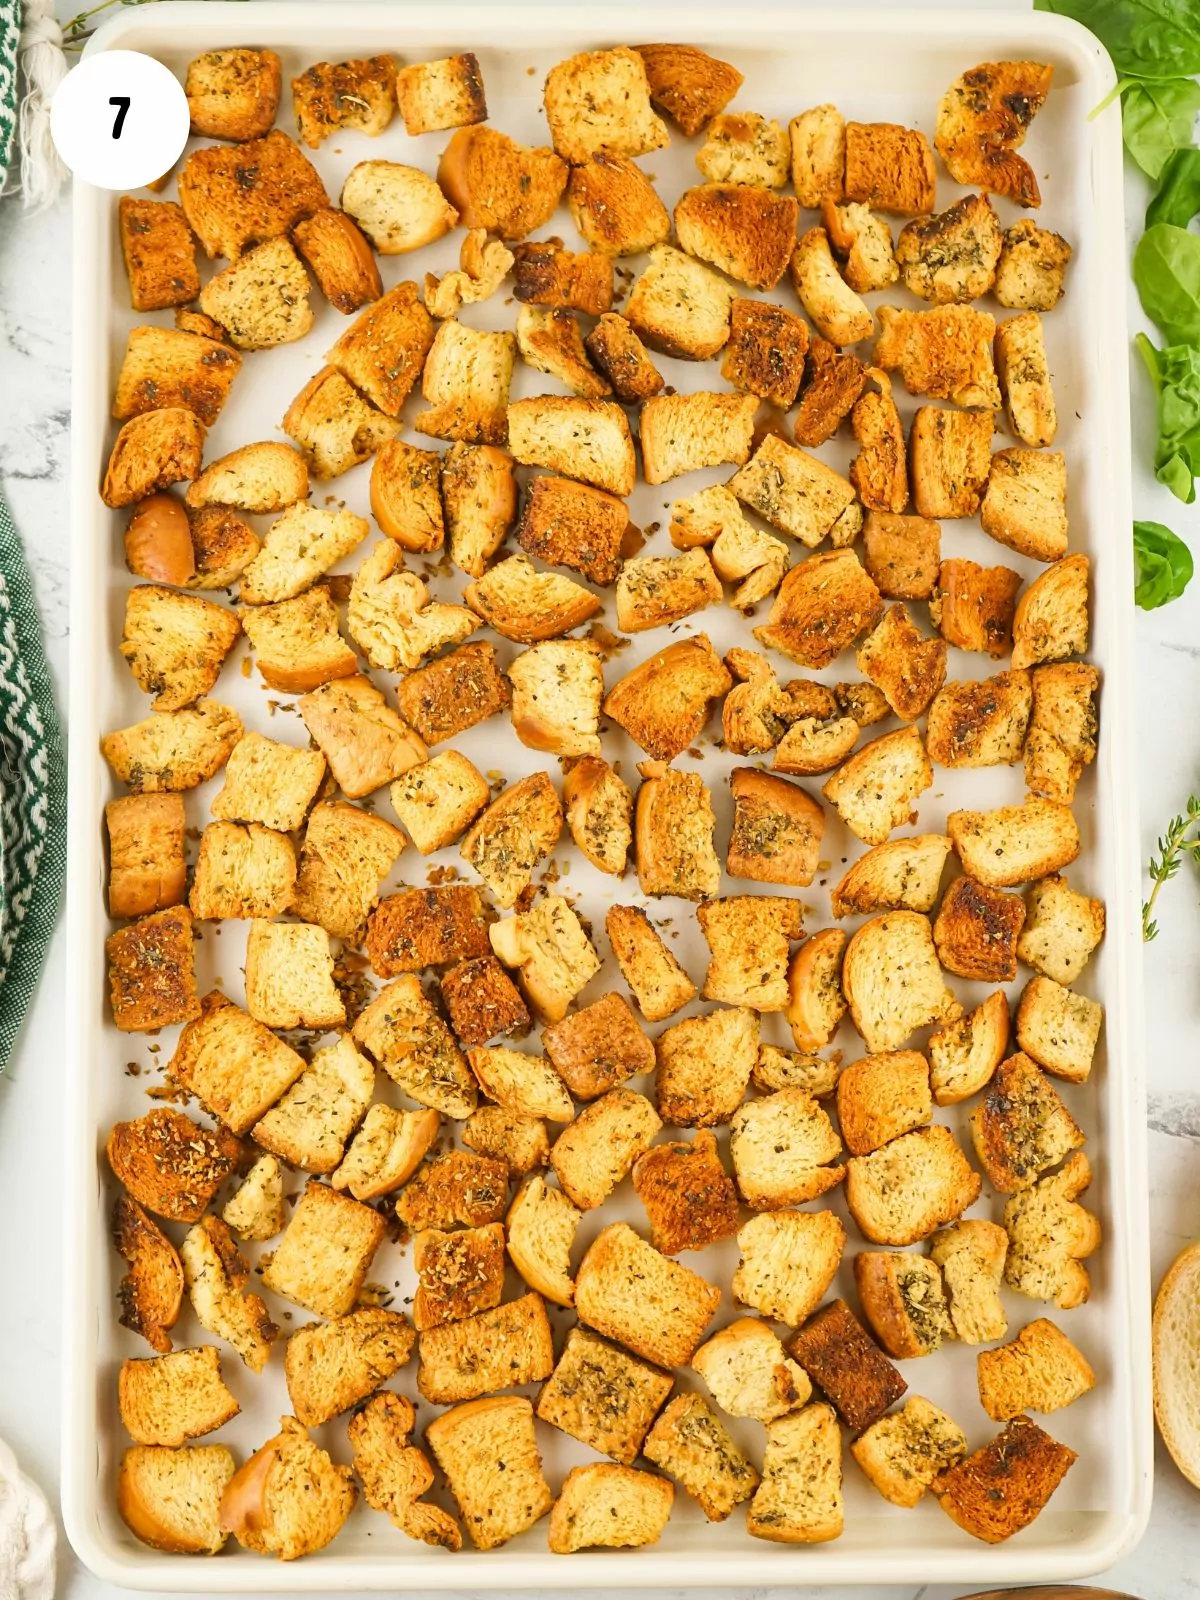 perfectly toasted bread cubes.